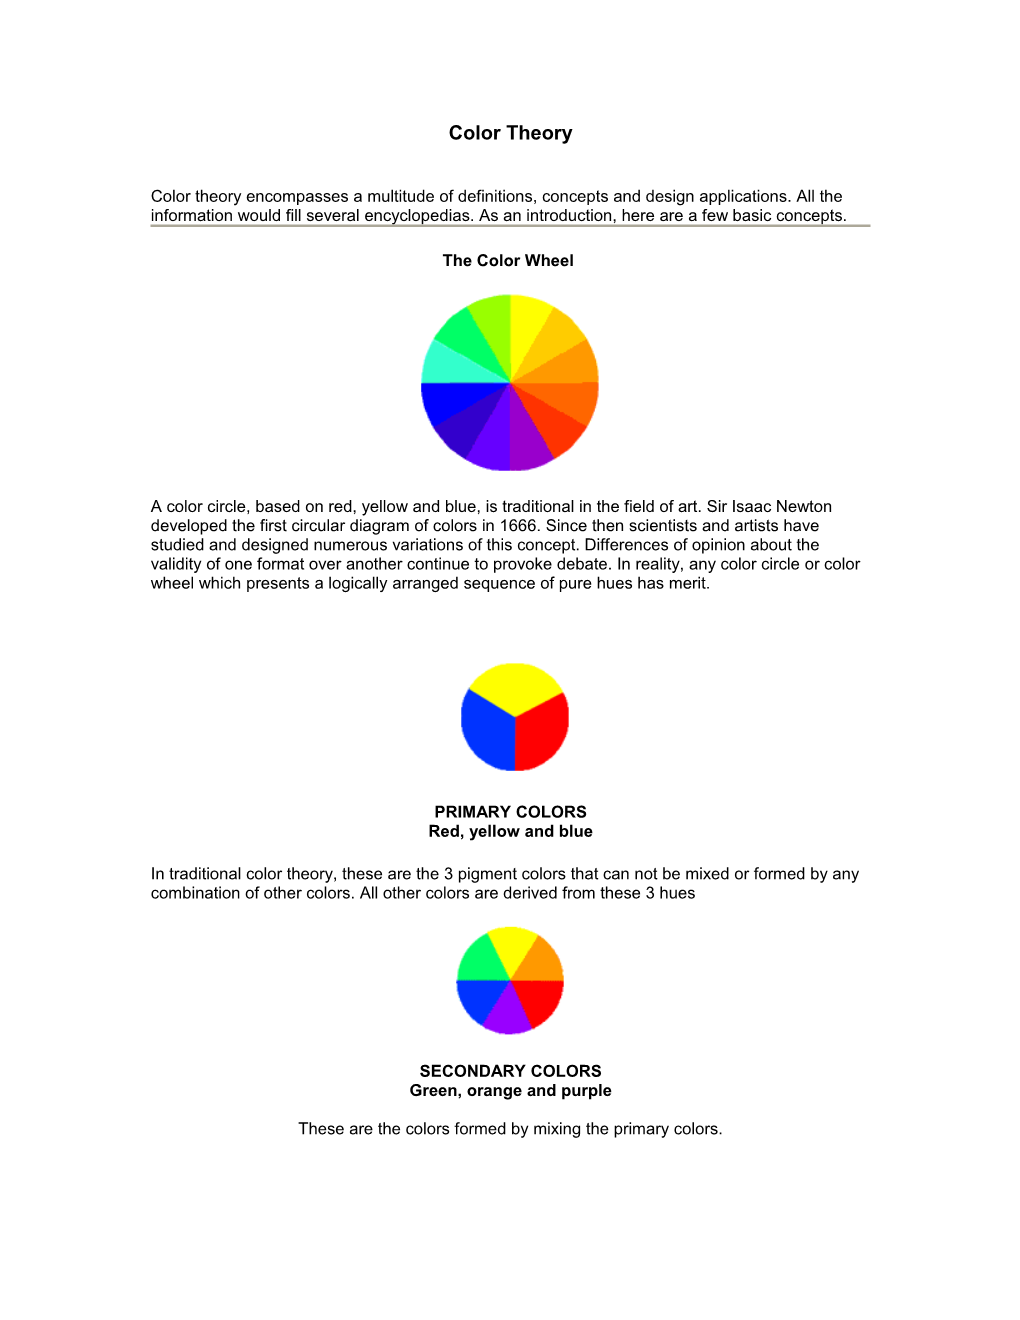 Color Theory Encompasses a Multitude of Definitions, Concepts and Design Applications